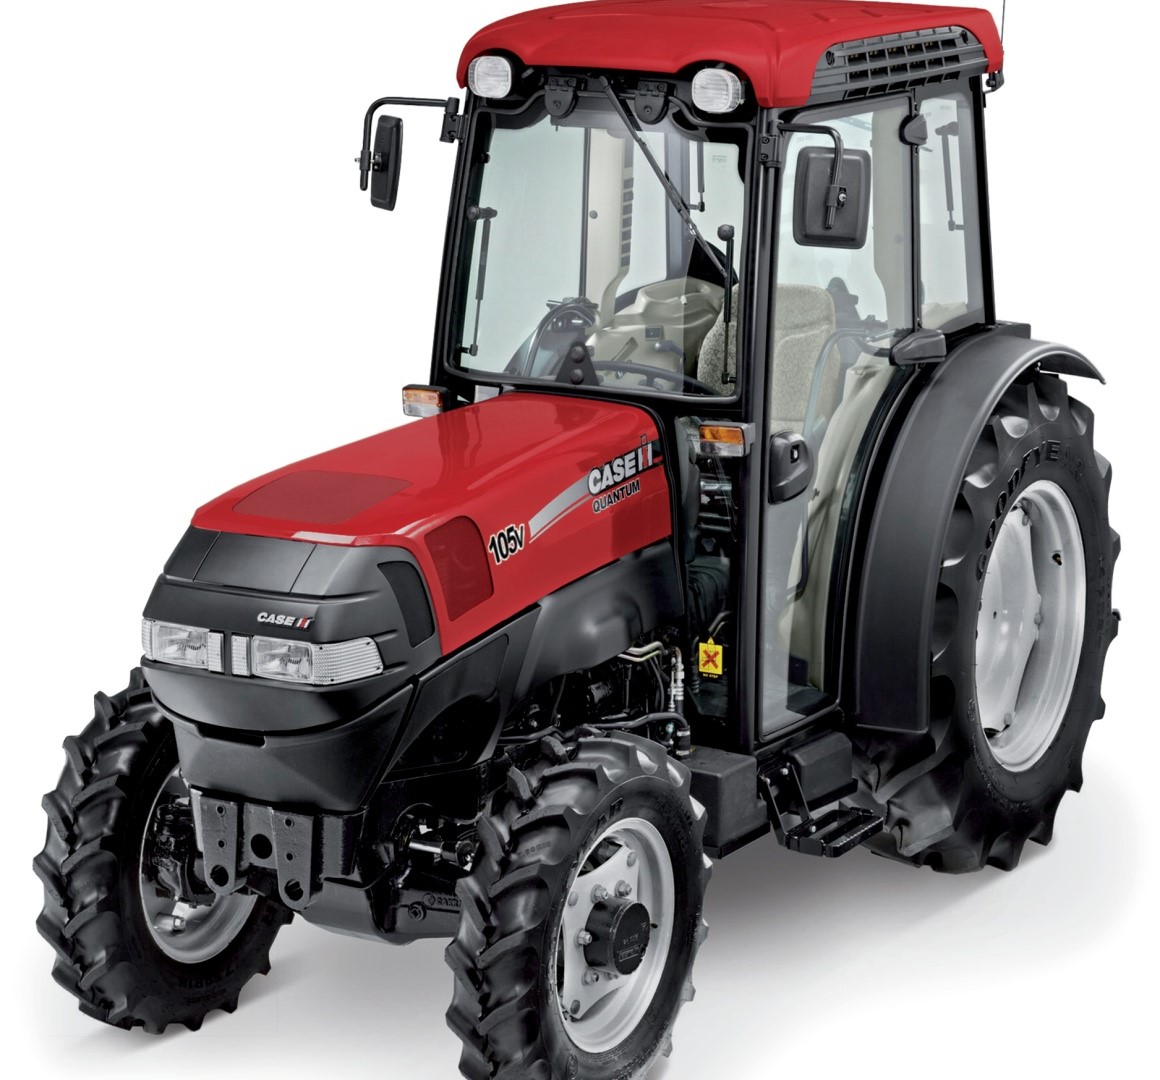 Case IH introduces the Farmall 105V tractor built specifically for orchards and vineyards.